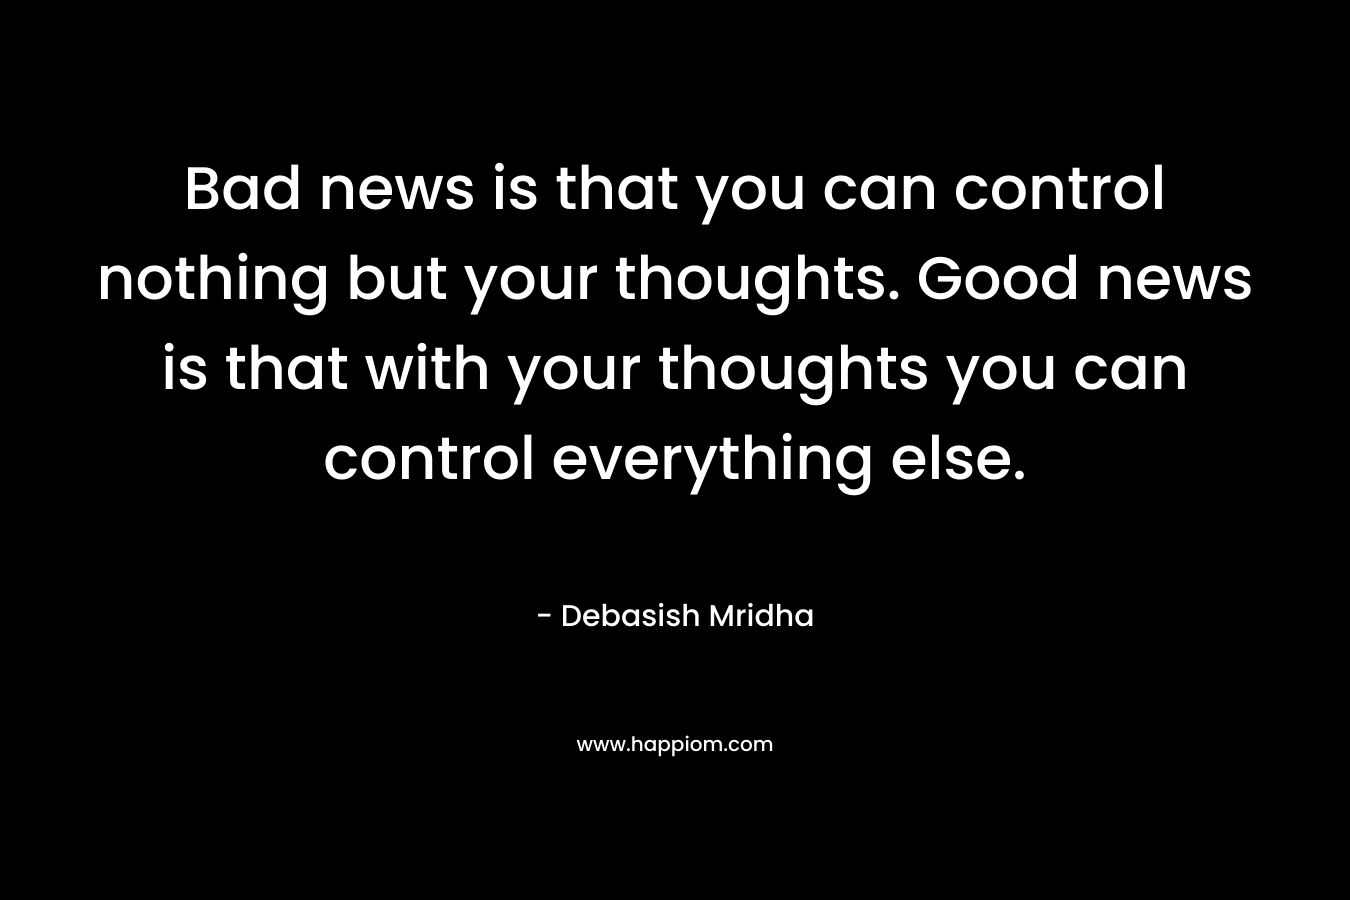 Bad news is that you can control nothing but your thoughts. Good news is that with your thoughts you can control everything else.